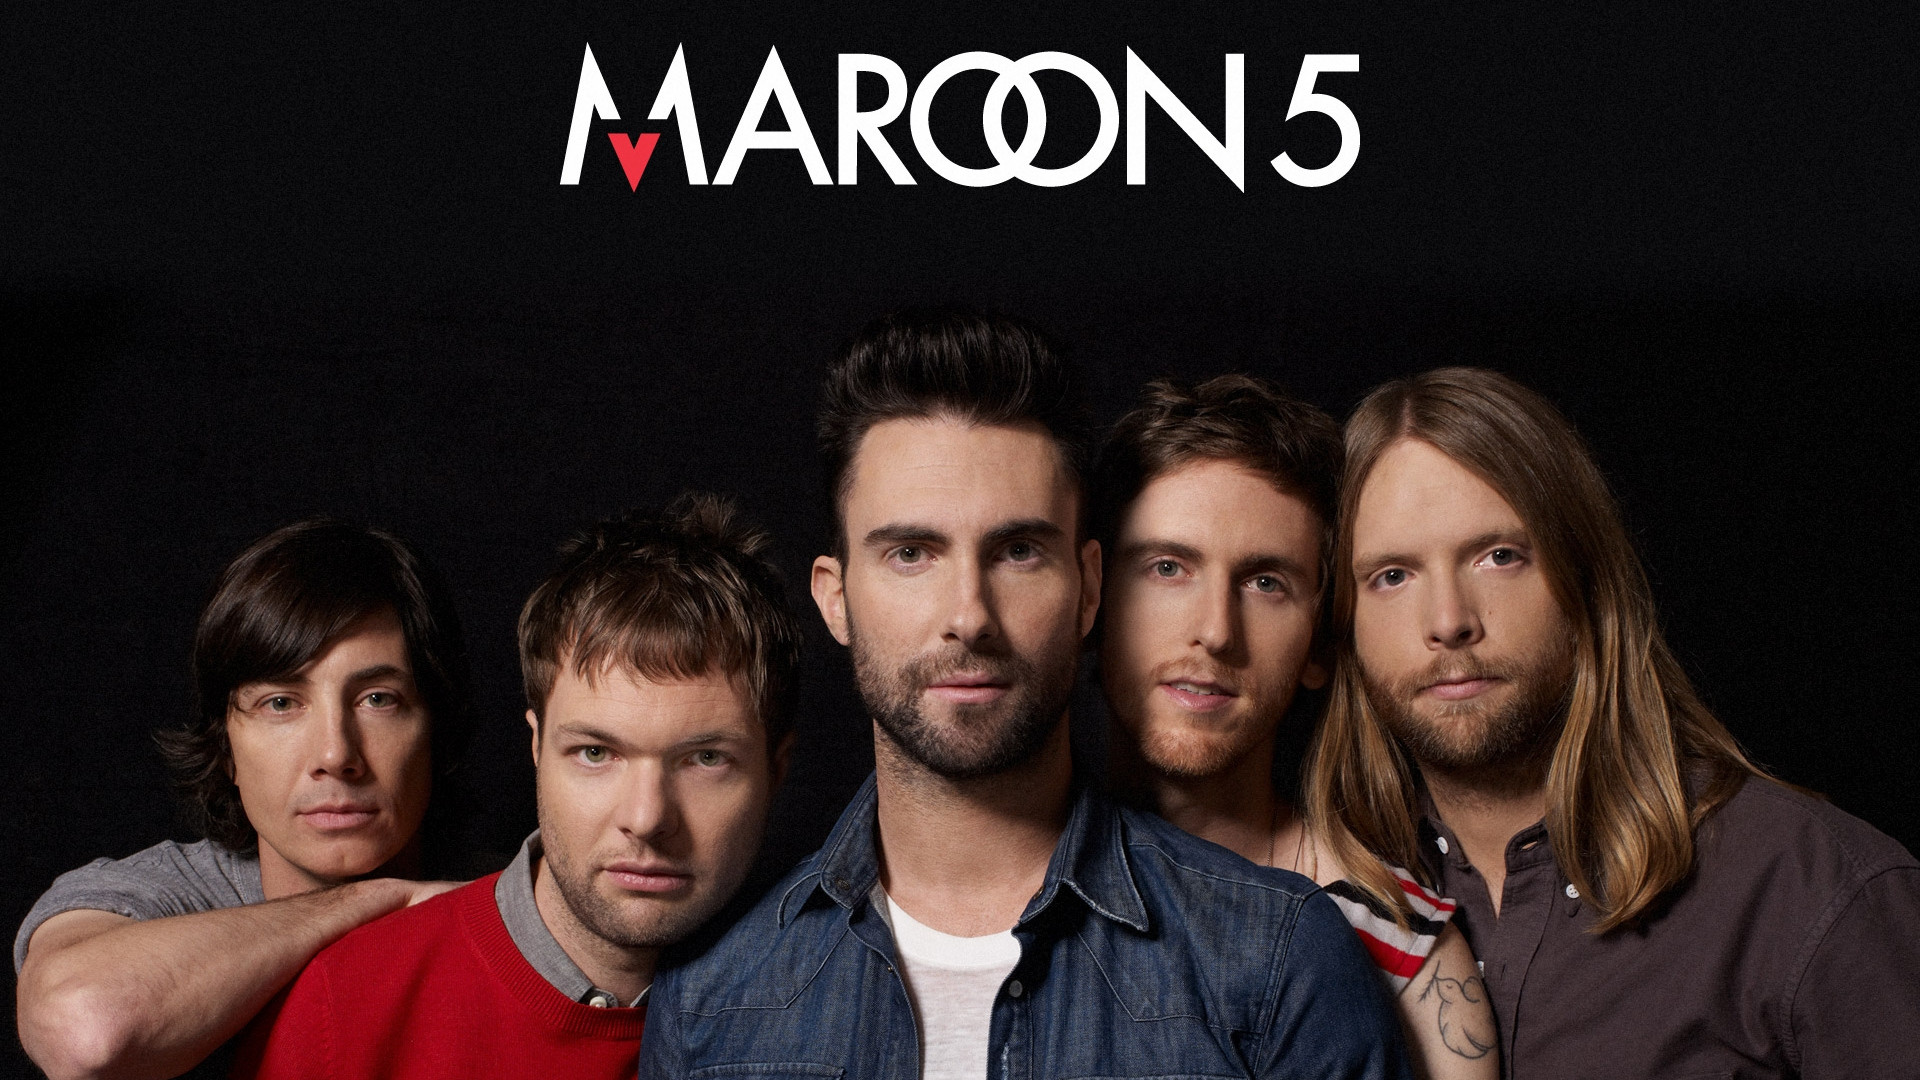 10 Little-Known Facts About Maroon 5 Members